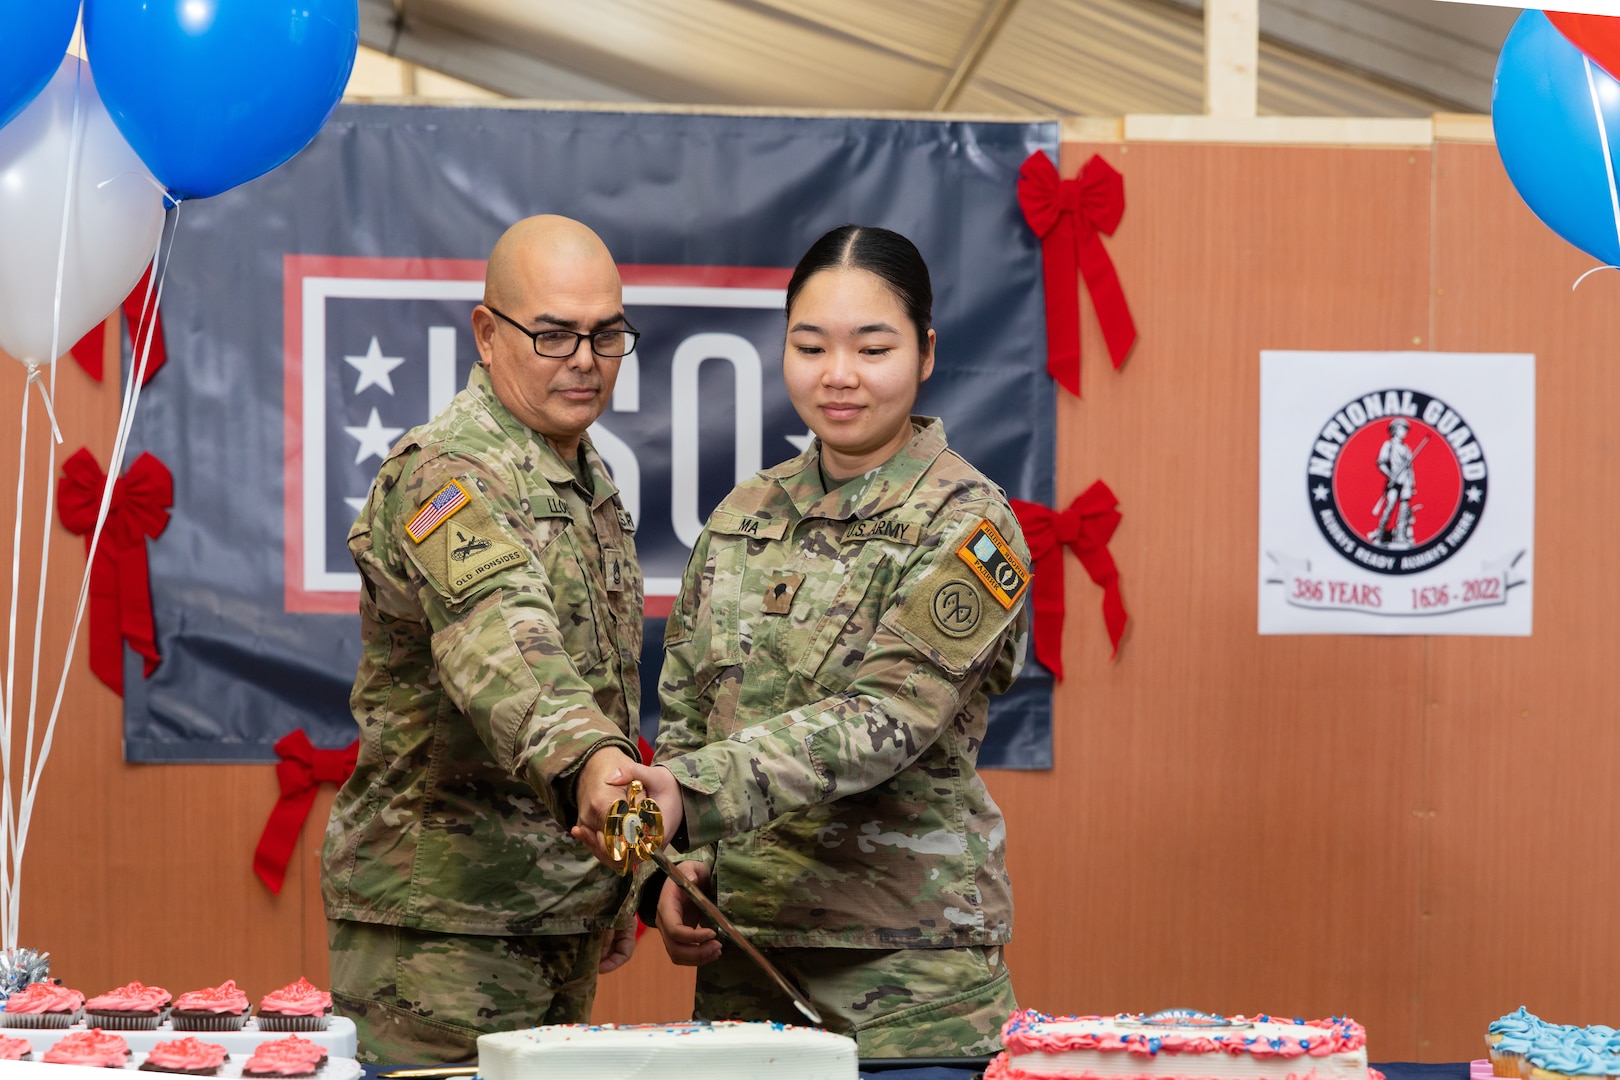 U.S. Army Sgt. 1st Class Raul Llopis, a unit supply specialist, and Spc. Catherina Ma, a combat medic, both assigned to Task Force Orion, 27th Infantry Brigade Combat Team, New York Army National Guard, carry on the Army tradition of a unit’s oldest and youngest Soldiers cutting a cake during a celebration of the 386th National Guard birthday in Grafenwohr, Germany, Dec. 13, 2022. The formation of the first militia regiments in North America Dec. 13, 1636, is recognized as the birth of the National Guard.